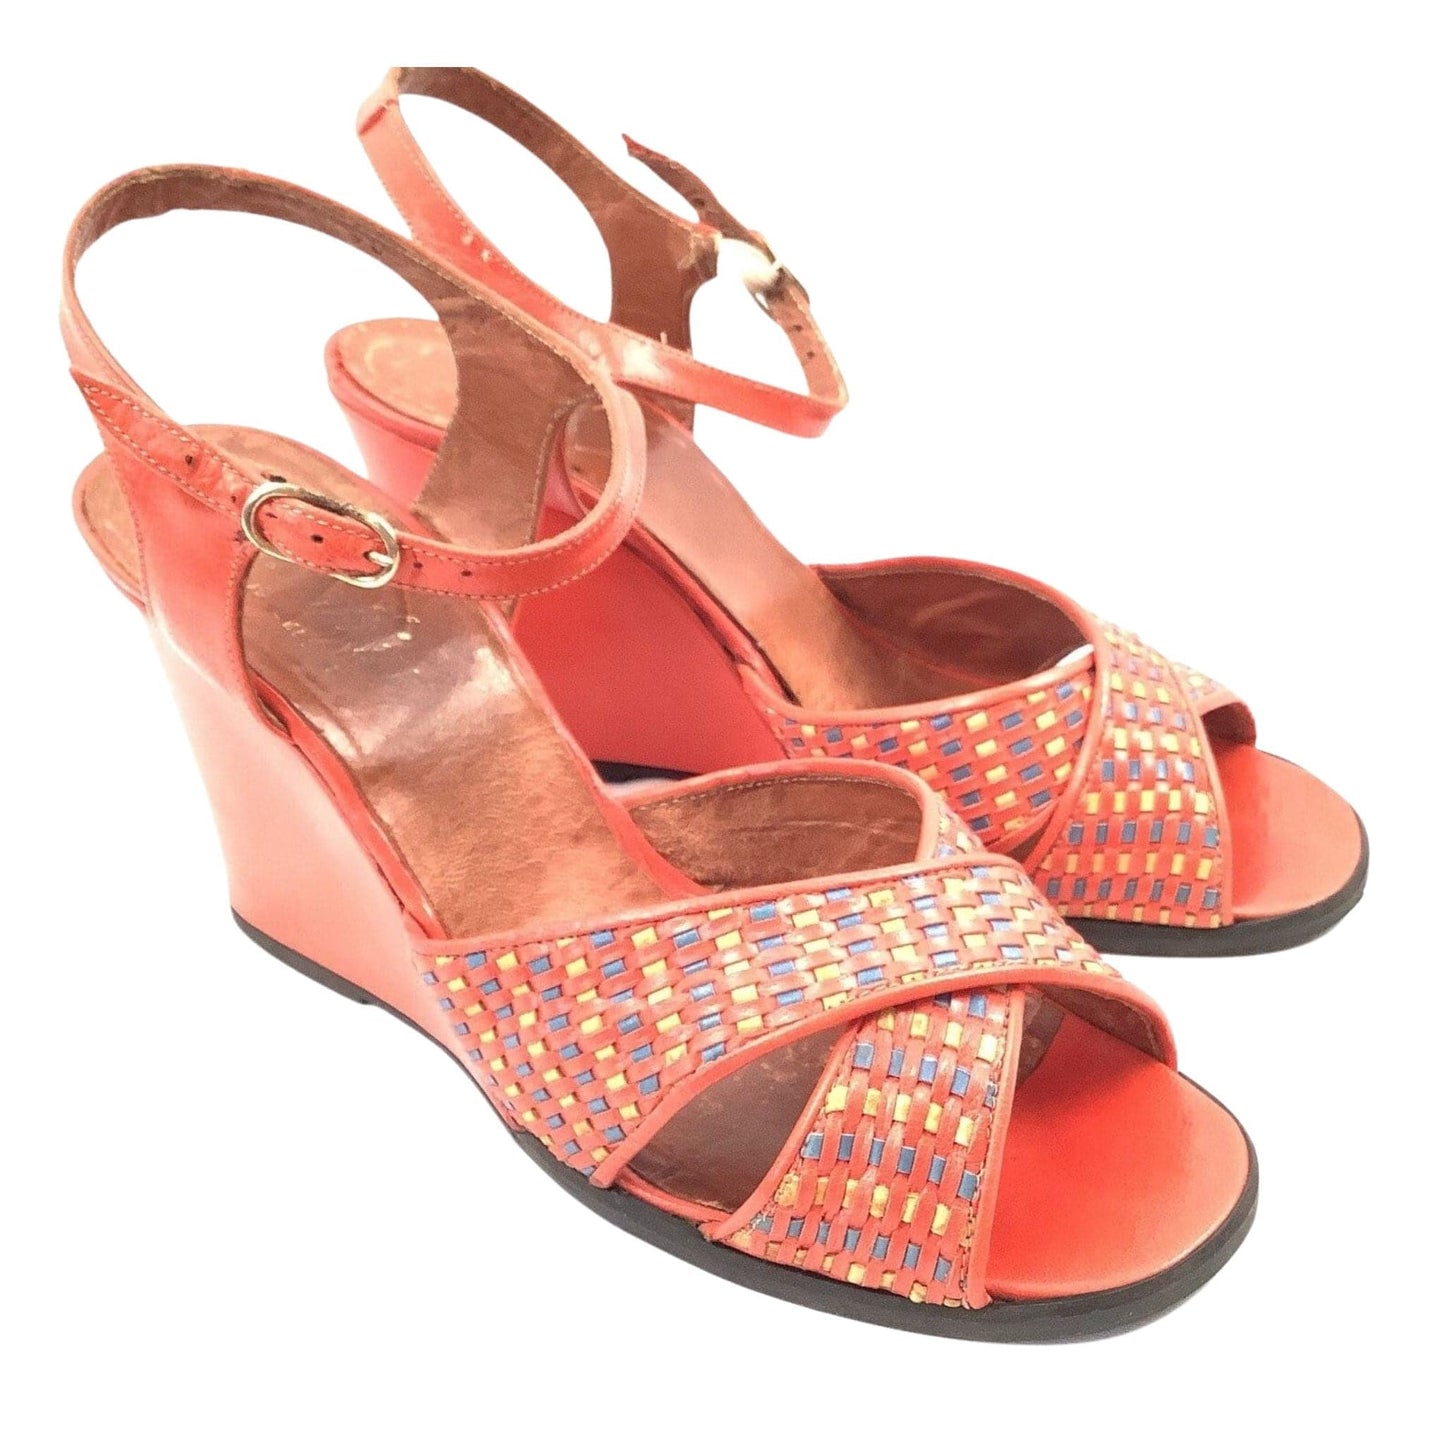 Woven Leather Wedge Sandals 7.5 / Multi / Vintage 1980s